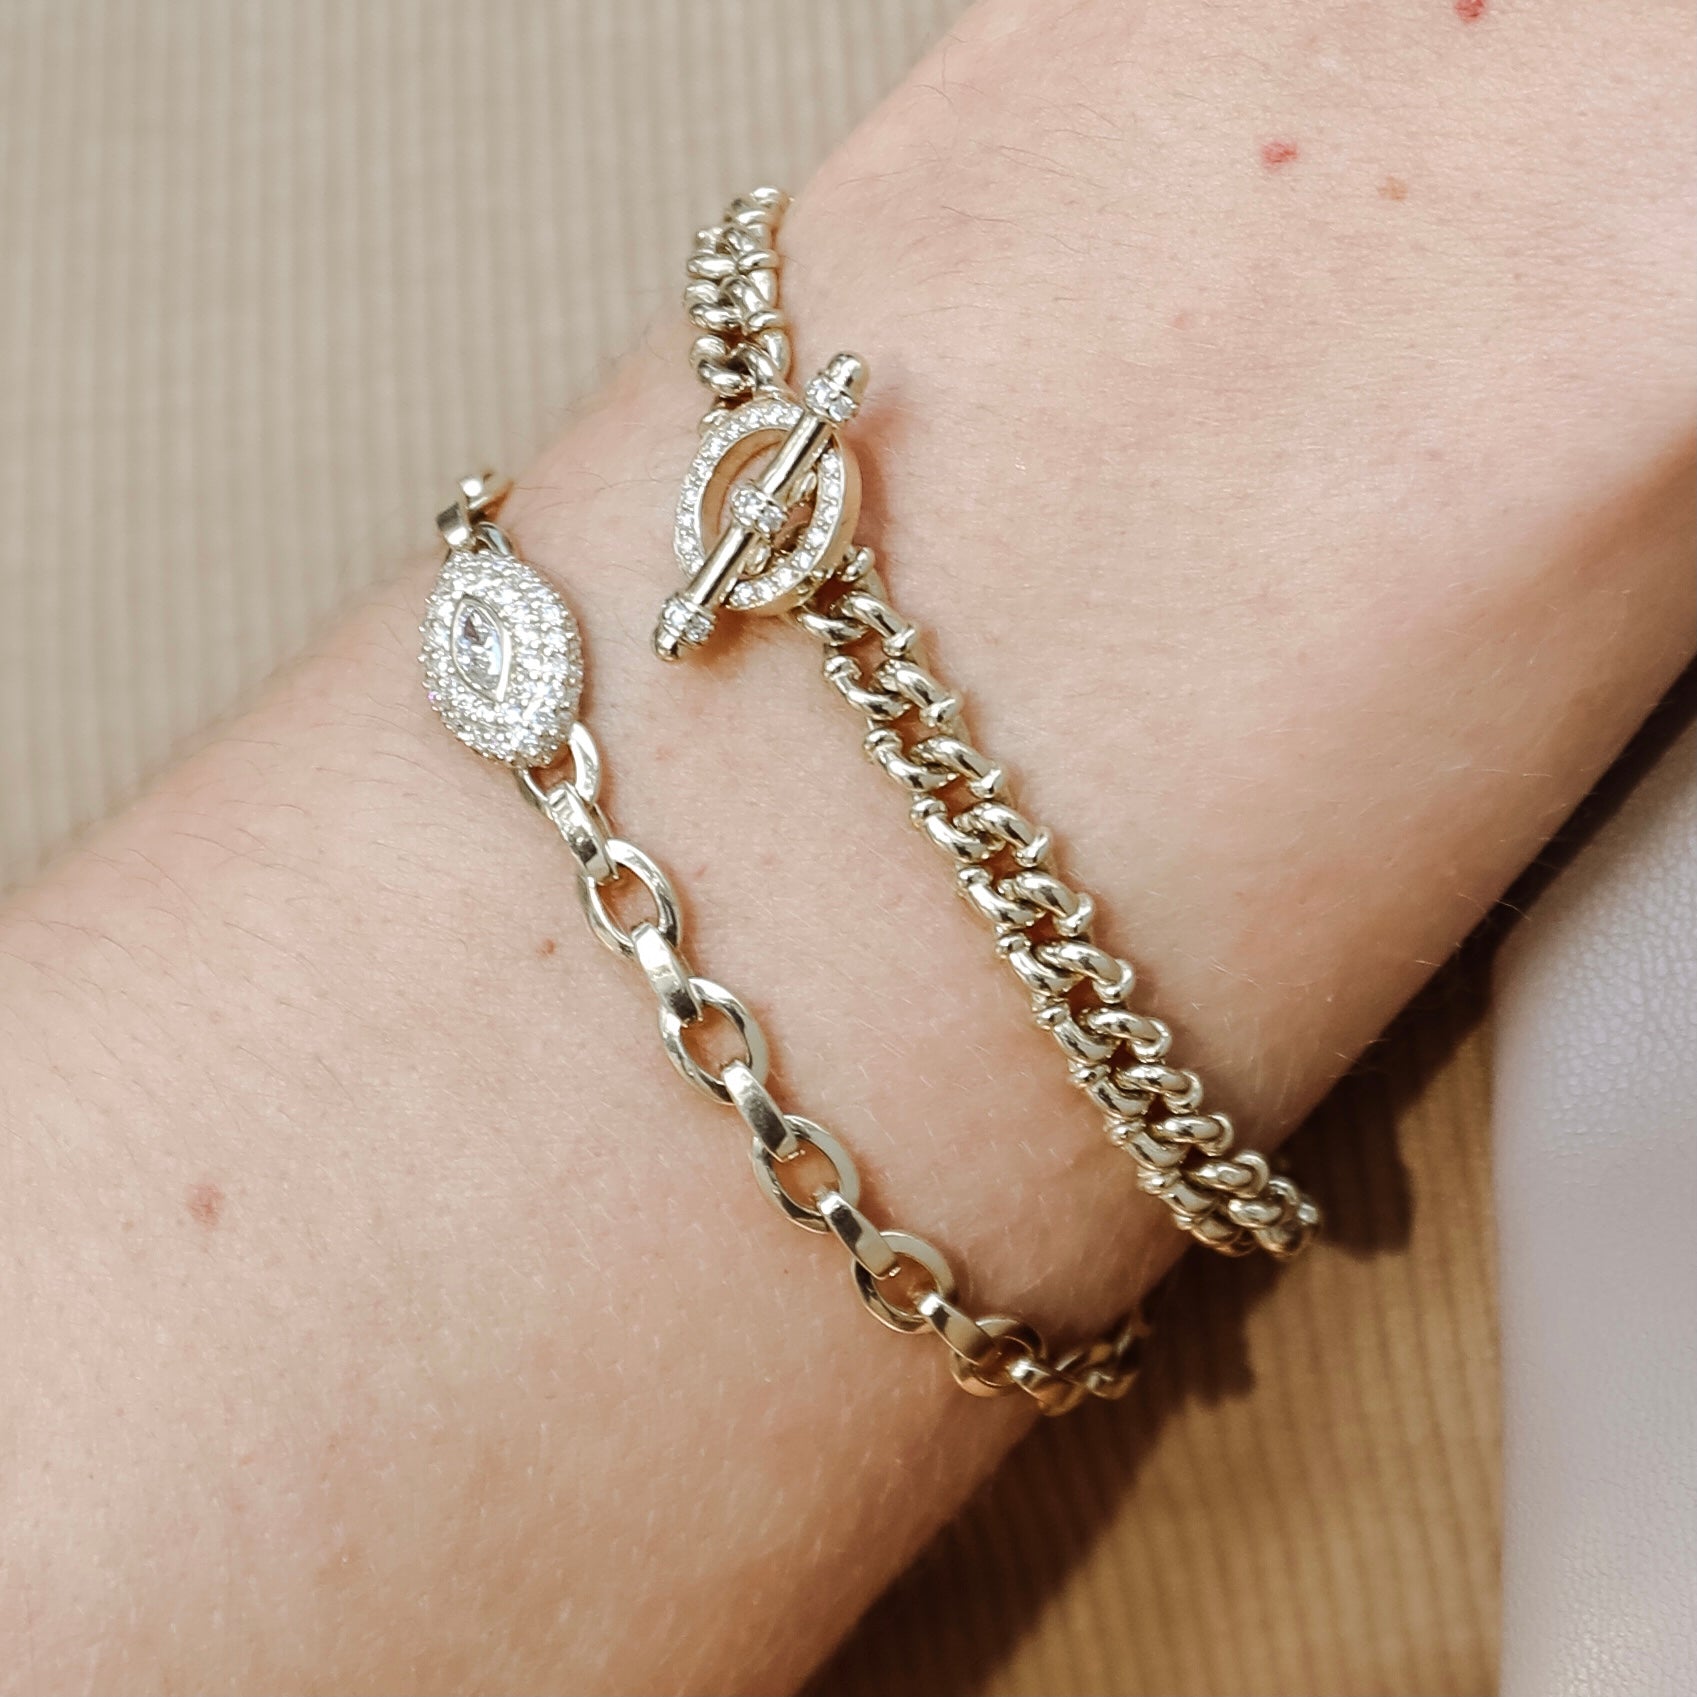 Marquise Link Bracelet shown with the Linked Bracelet in Yellow Gold